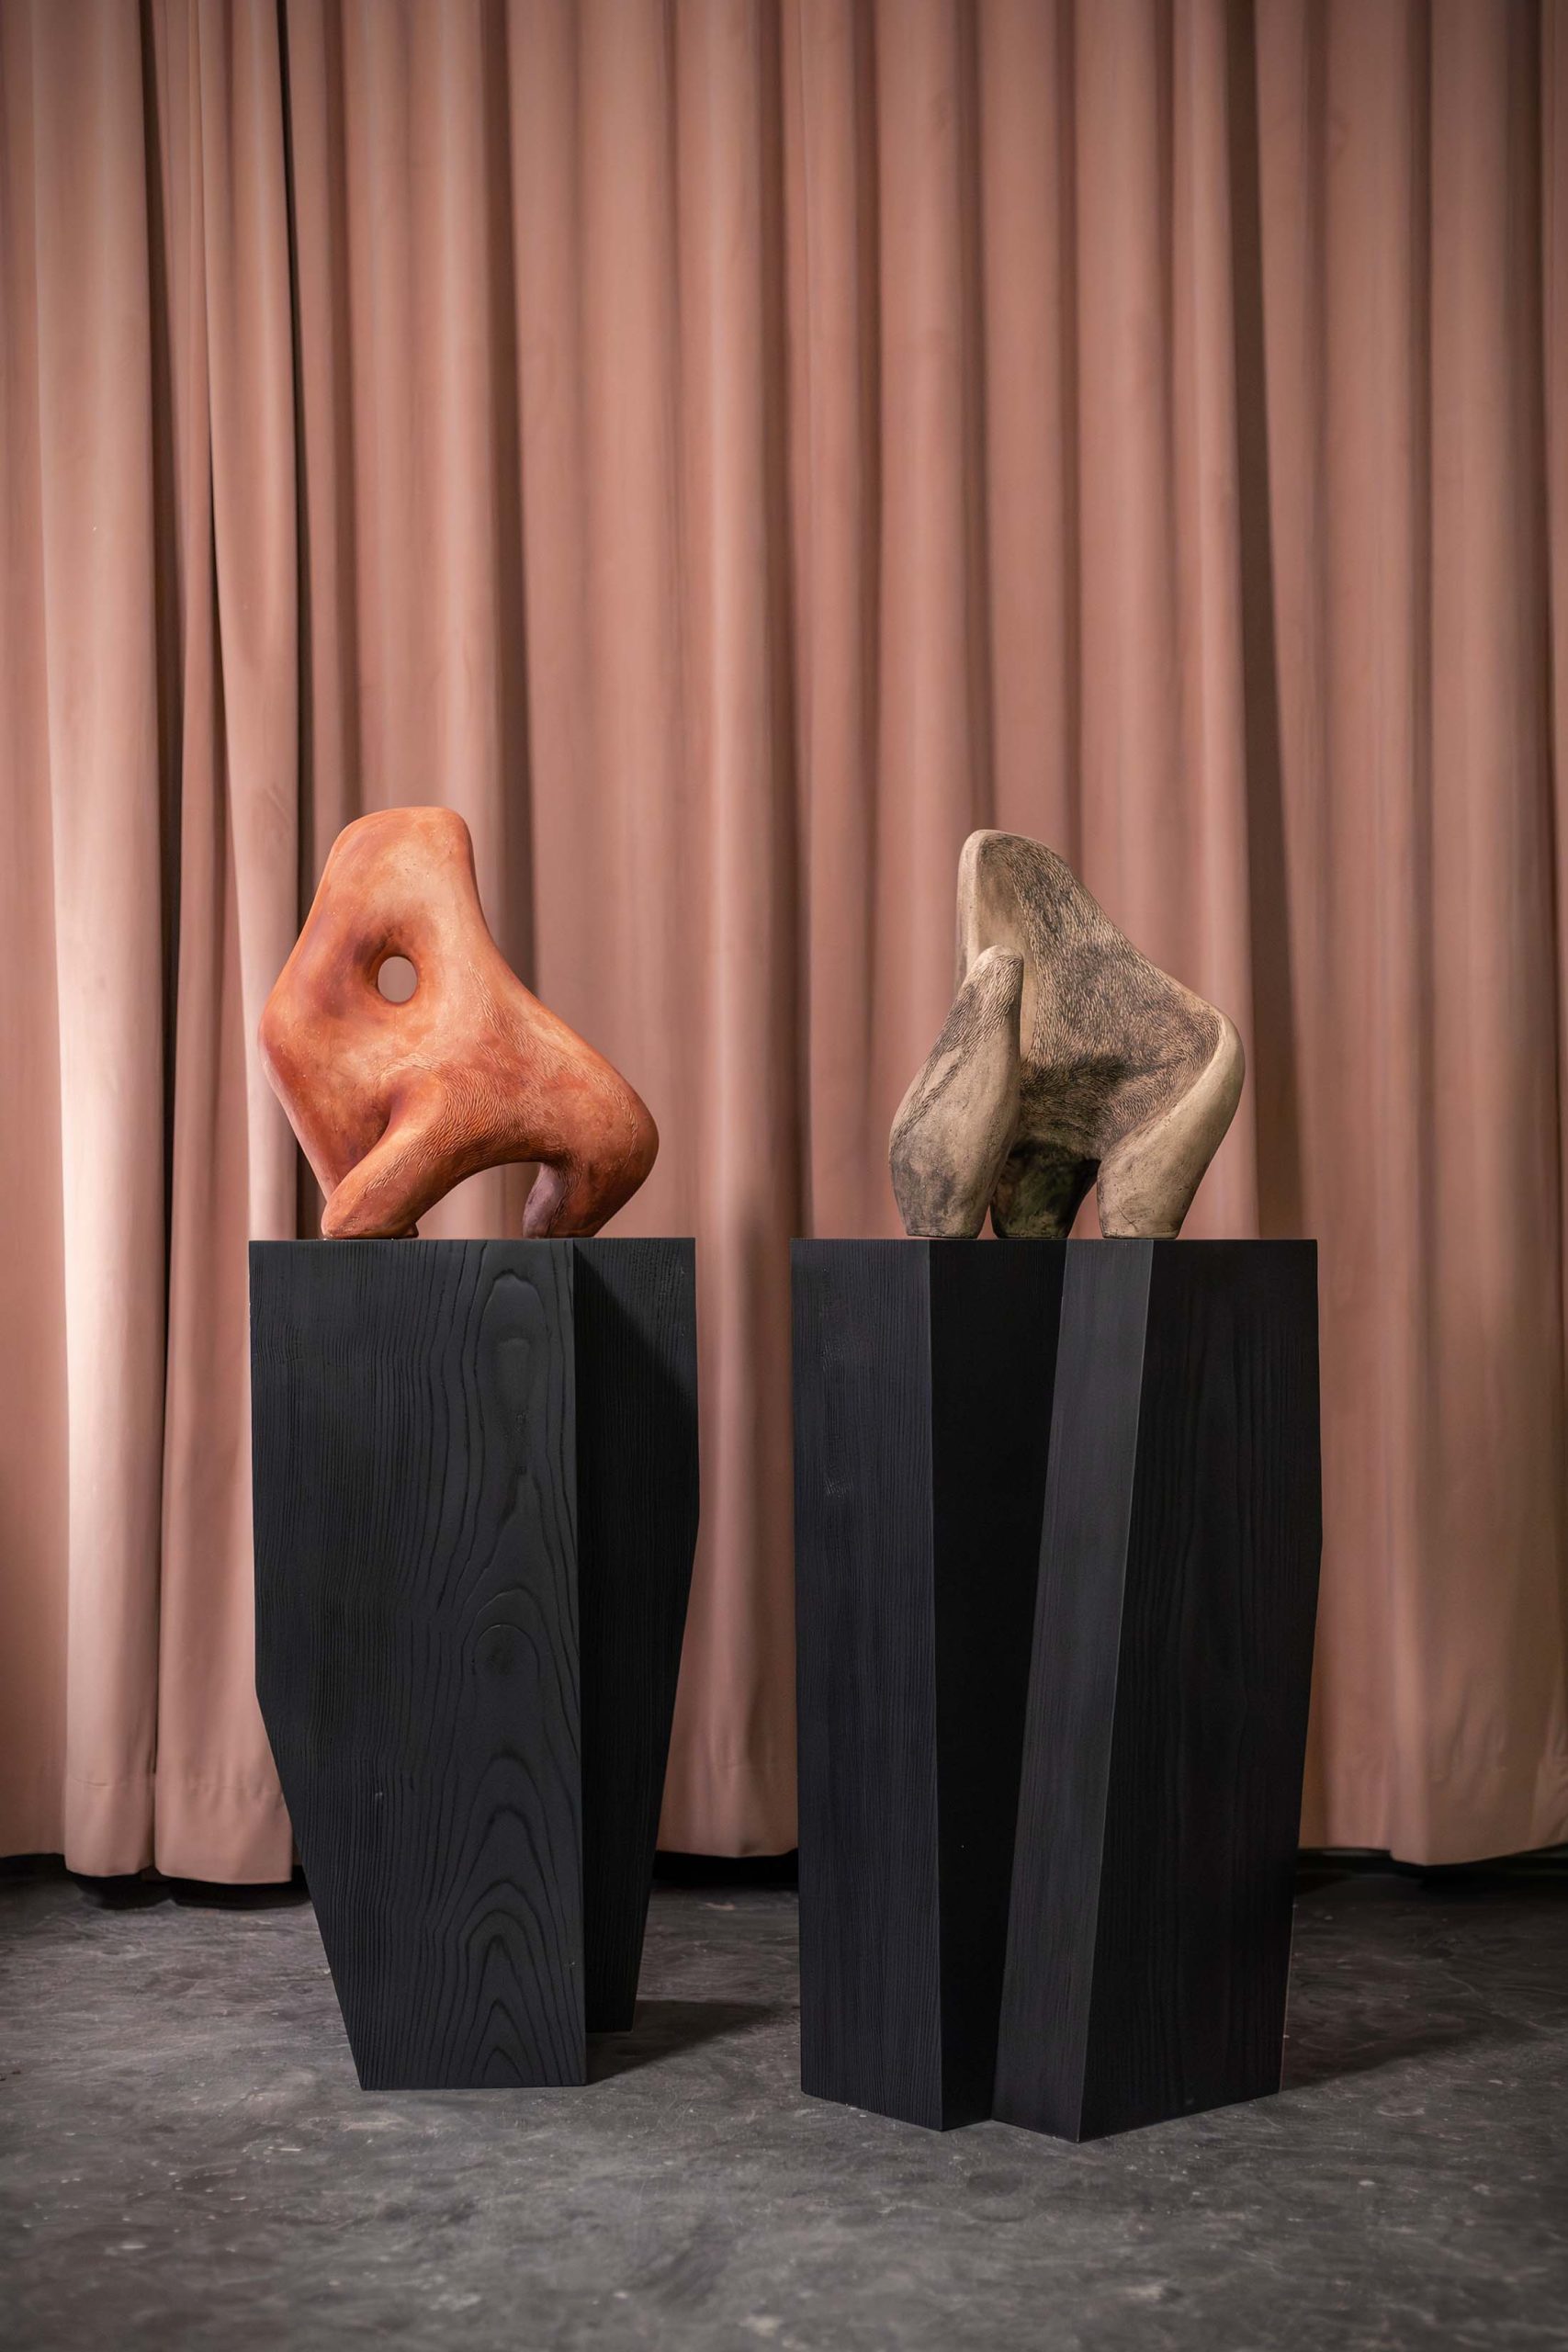 Two abstract sculptures are perched atop angular black plinths, one terracotta-colored with a smooth, curvaceous form and a hollow center, and the other resembling a rough, stone-like texture in neutral hues. These pieces exemplify the fusion of organic and geometric aesthetics, reflecting the innovative design narrative of OKHA's Cape Town Exhibition, set against a backdrop of subtle pink curtains.